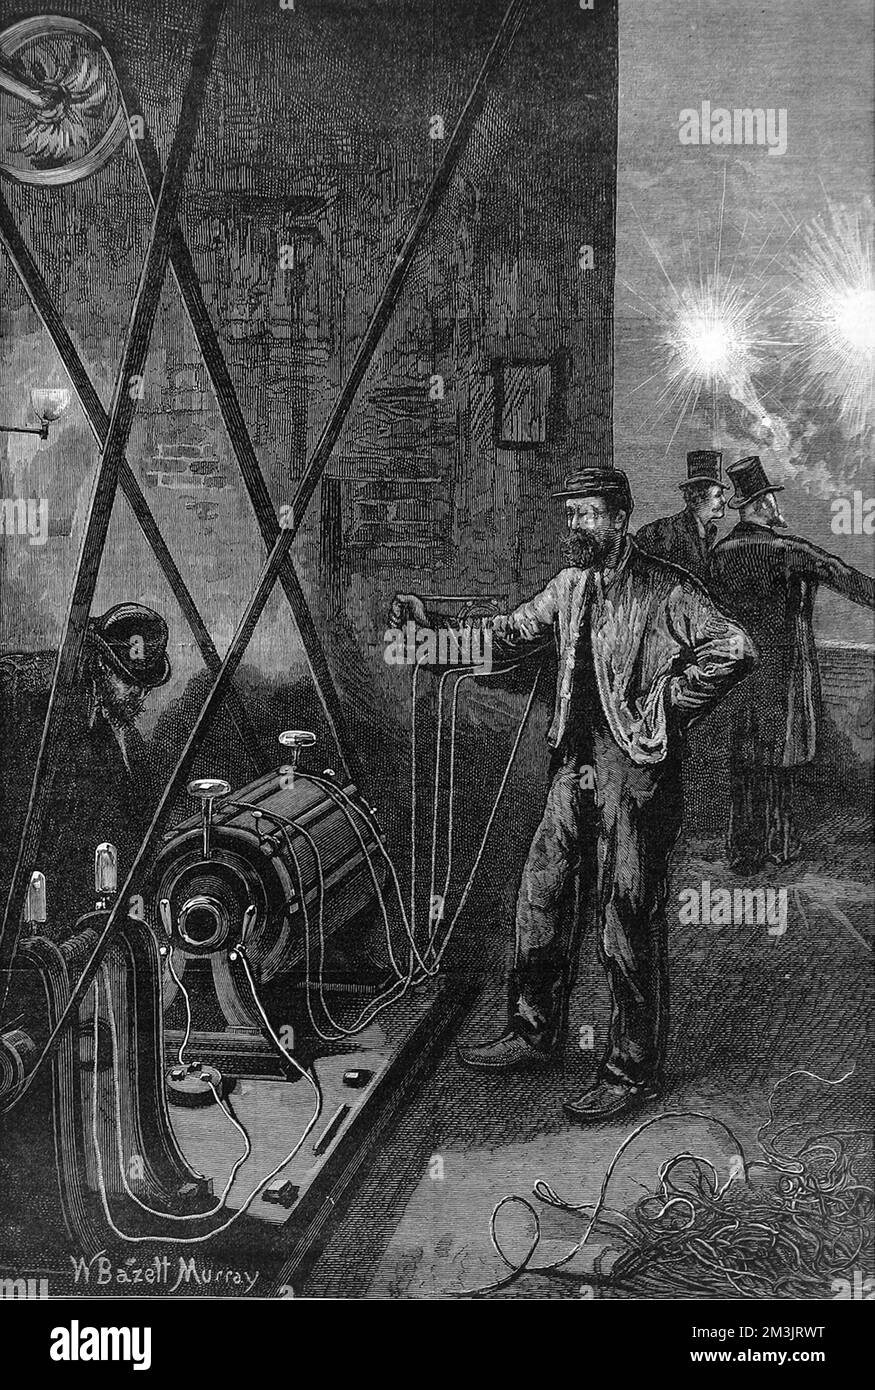 Electric light apparatus, known as the Dynamo-Electrical machine. Made by the Russian engineer M. Jablochkoff, the machine was employed by him to generate electric currents called the 'Gramme' after the name of its French inventor. The machine was refine and modified by Jablochkoff to improve its efficiency. Stock Photo